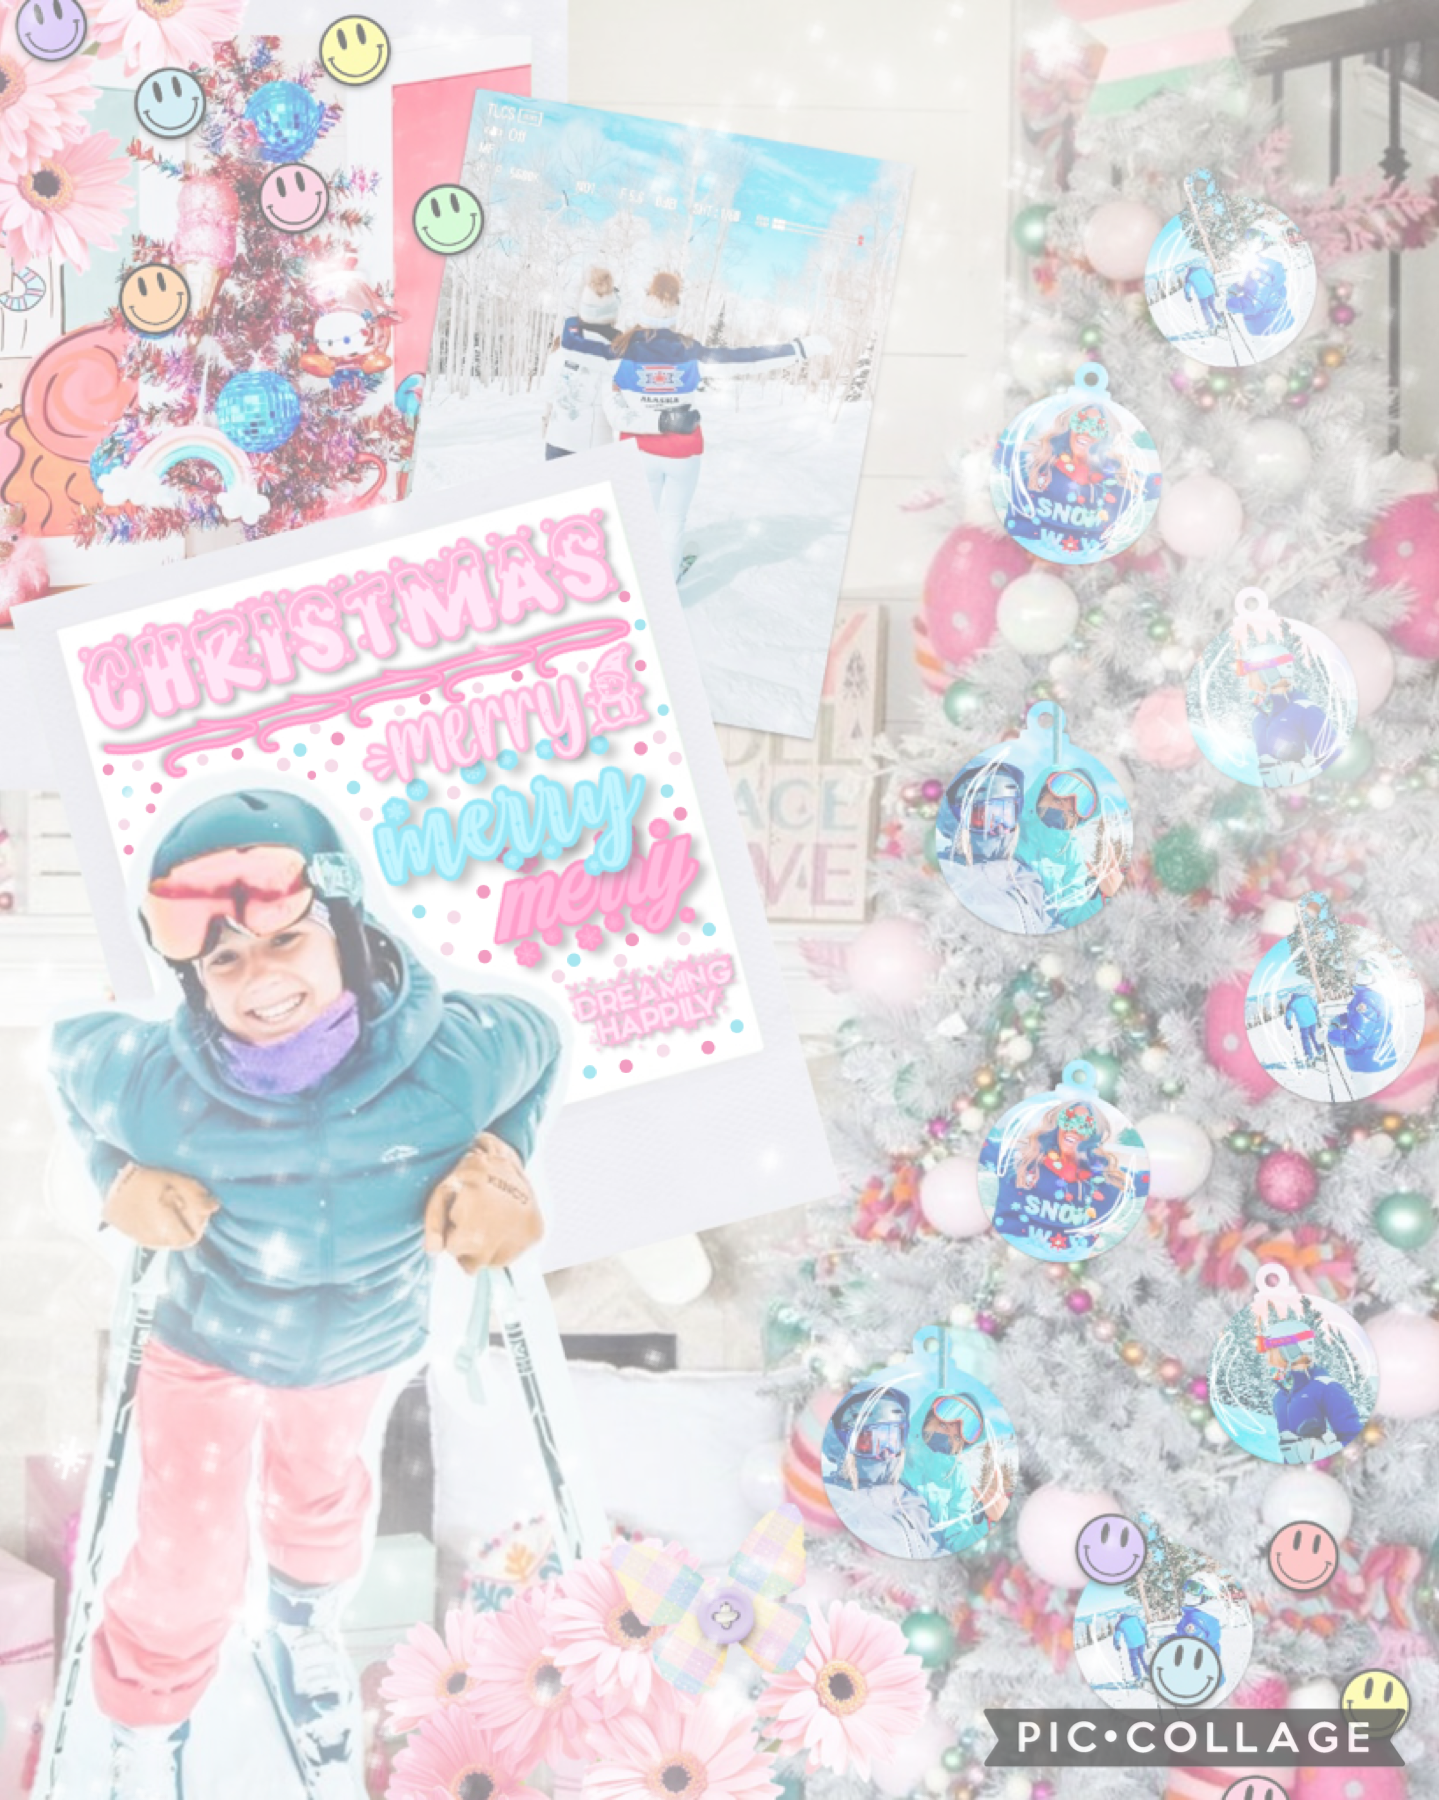 🎄❄️🧤12/25/22🧤❄️🎄 [TAP]
MERRY CHRISTMASS!!!! i hope everyone got sth they wanted <3 i’m grateful for everything i got!! NEW THEME AFTER THIS POSTTT 🤞 i’m gonna miss this one tho!! qotd: fav thing u got for christmas? 